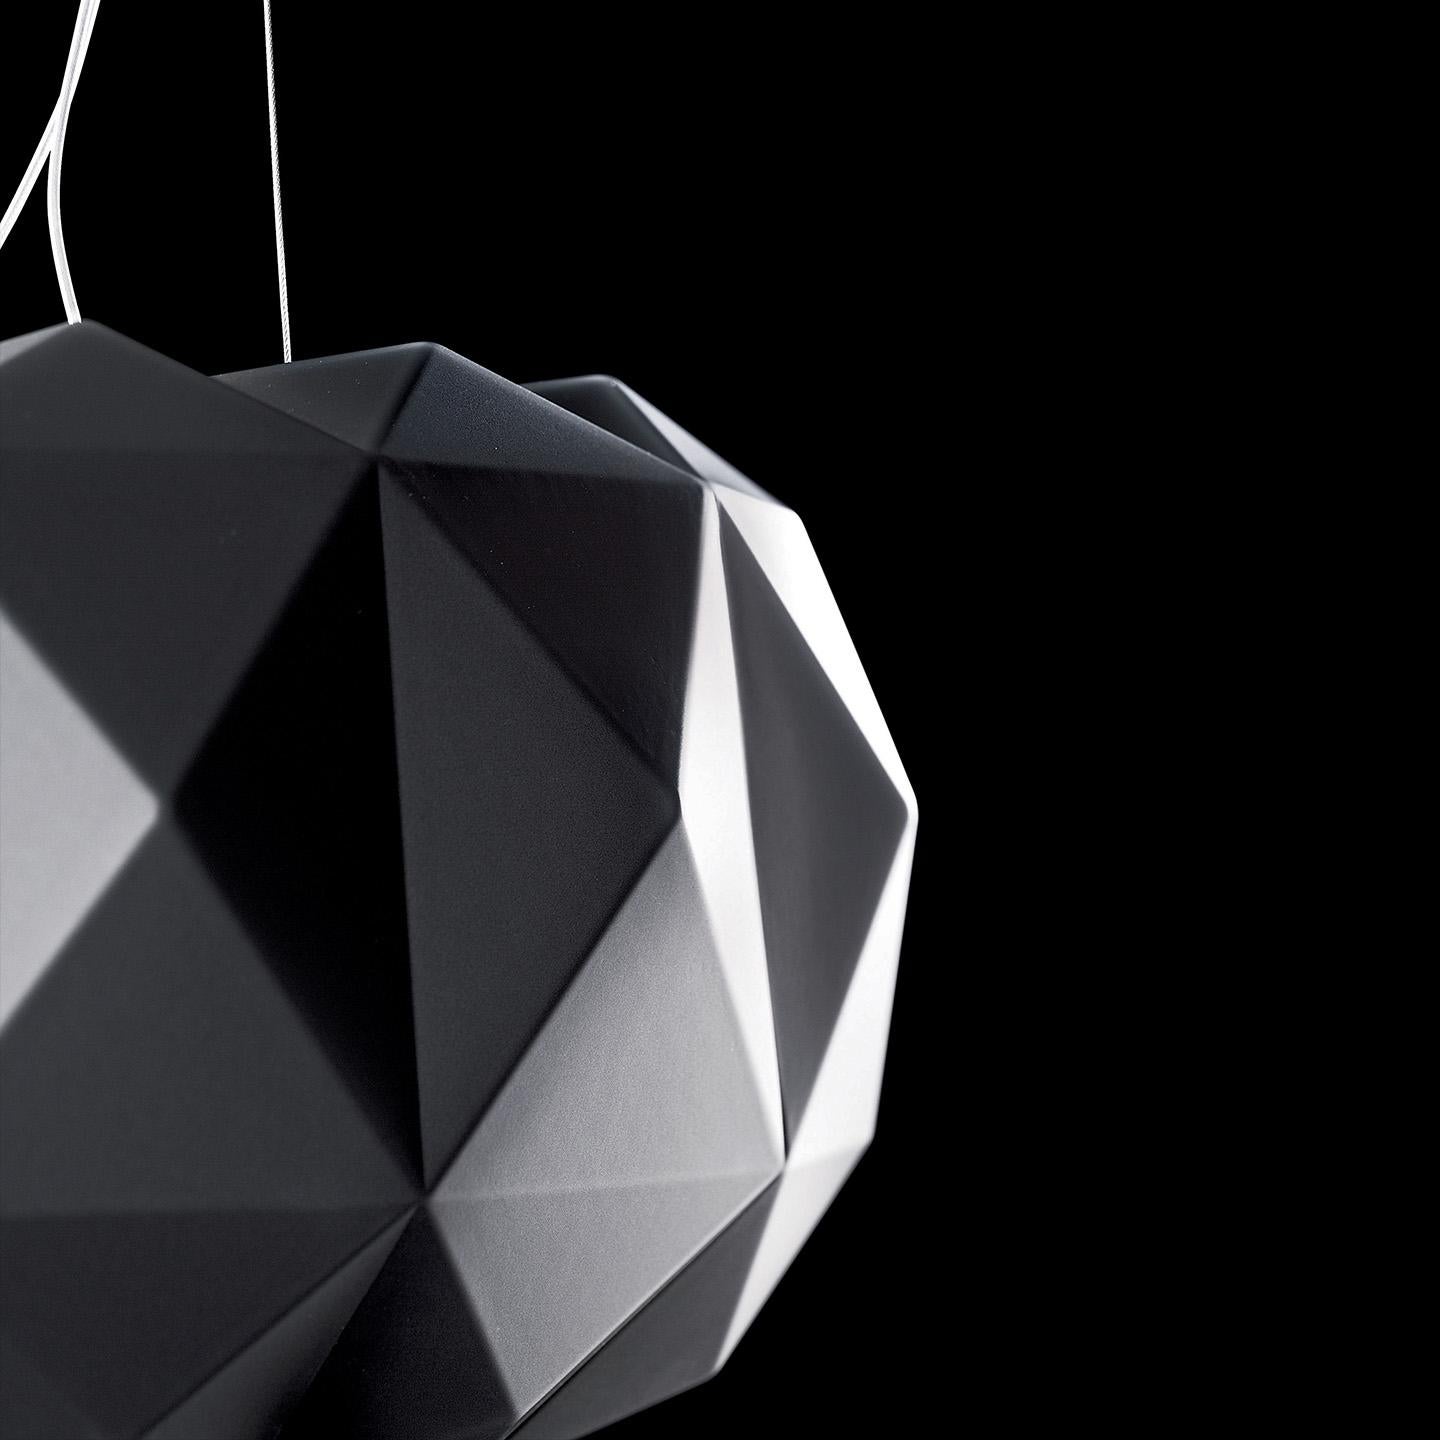 The Deluxe Pendant, designed by Archirivolto, is a versatile and bold lighting collection featuring a geometrically-patterned, cloud-shaped hand-blown glass diffuser. Its hand blown satin white or matte black diffuser is made of multiple layers of